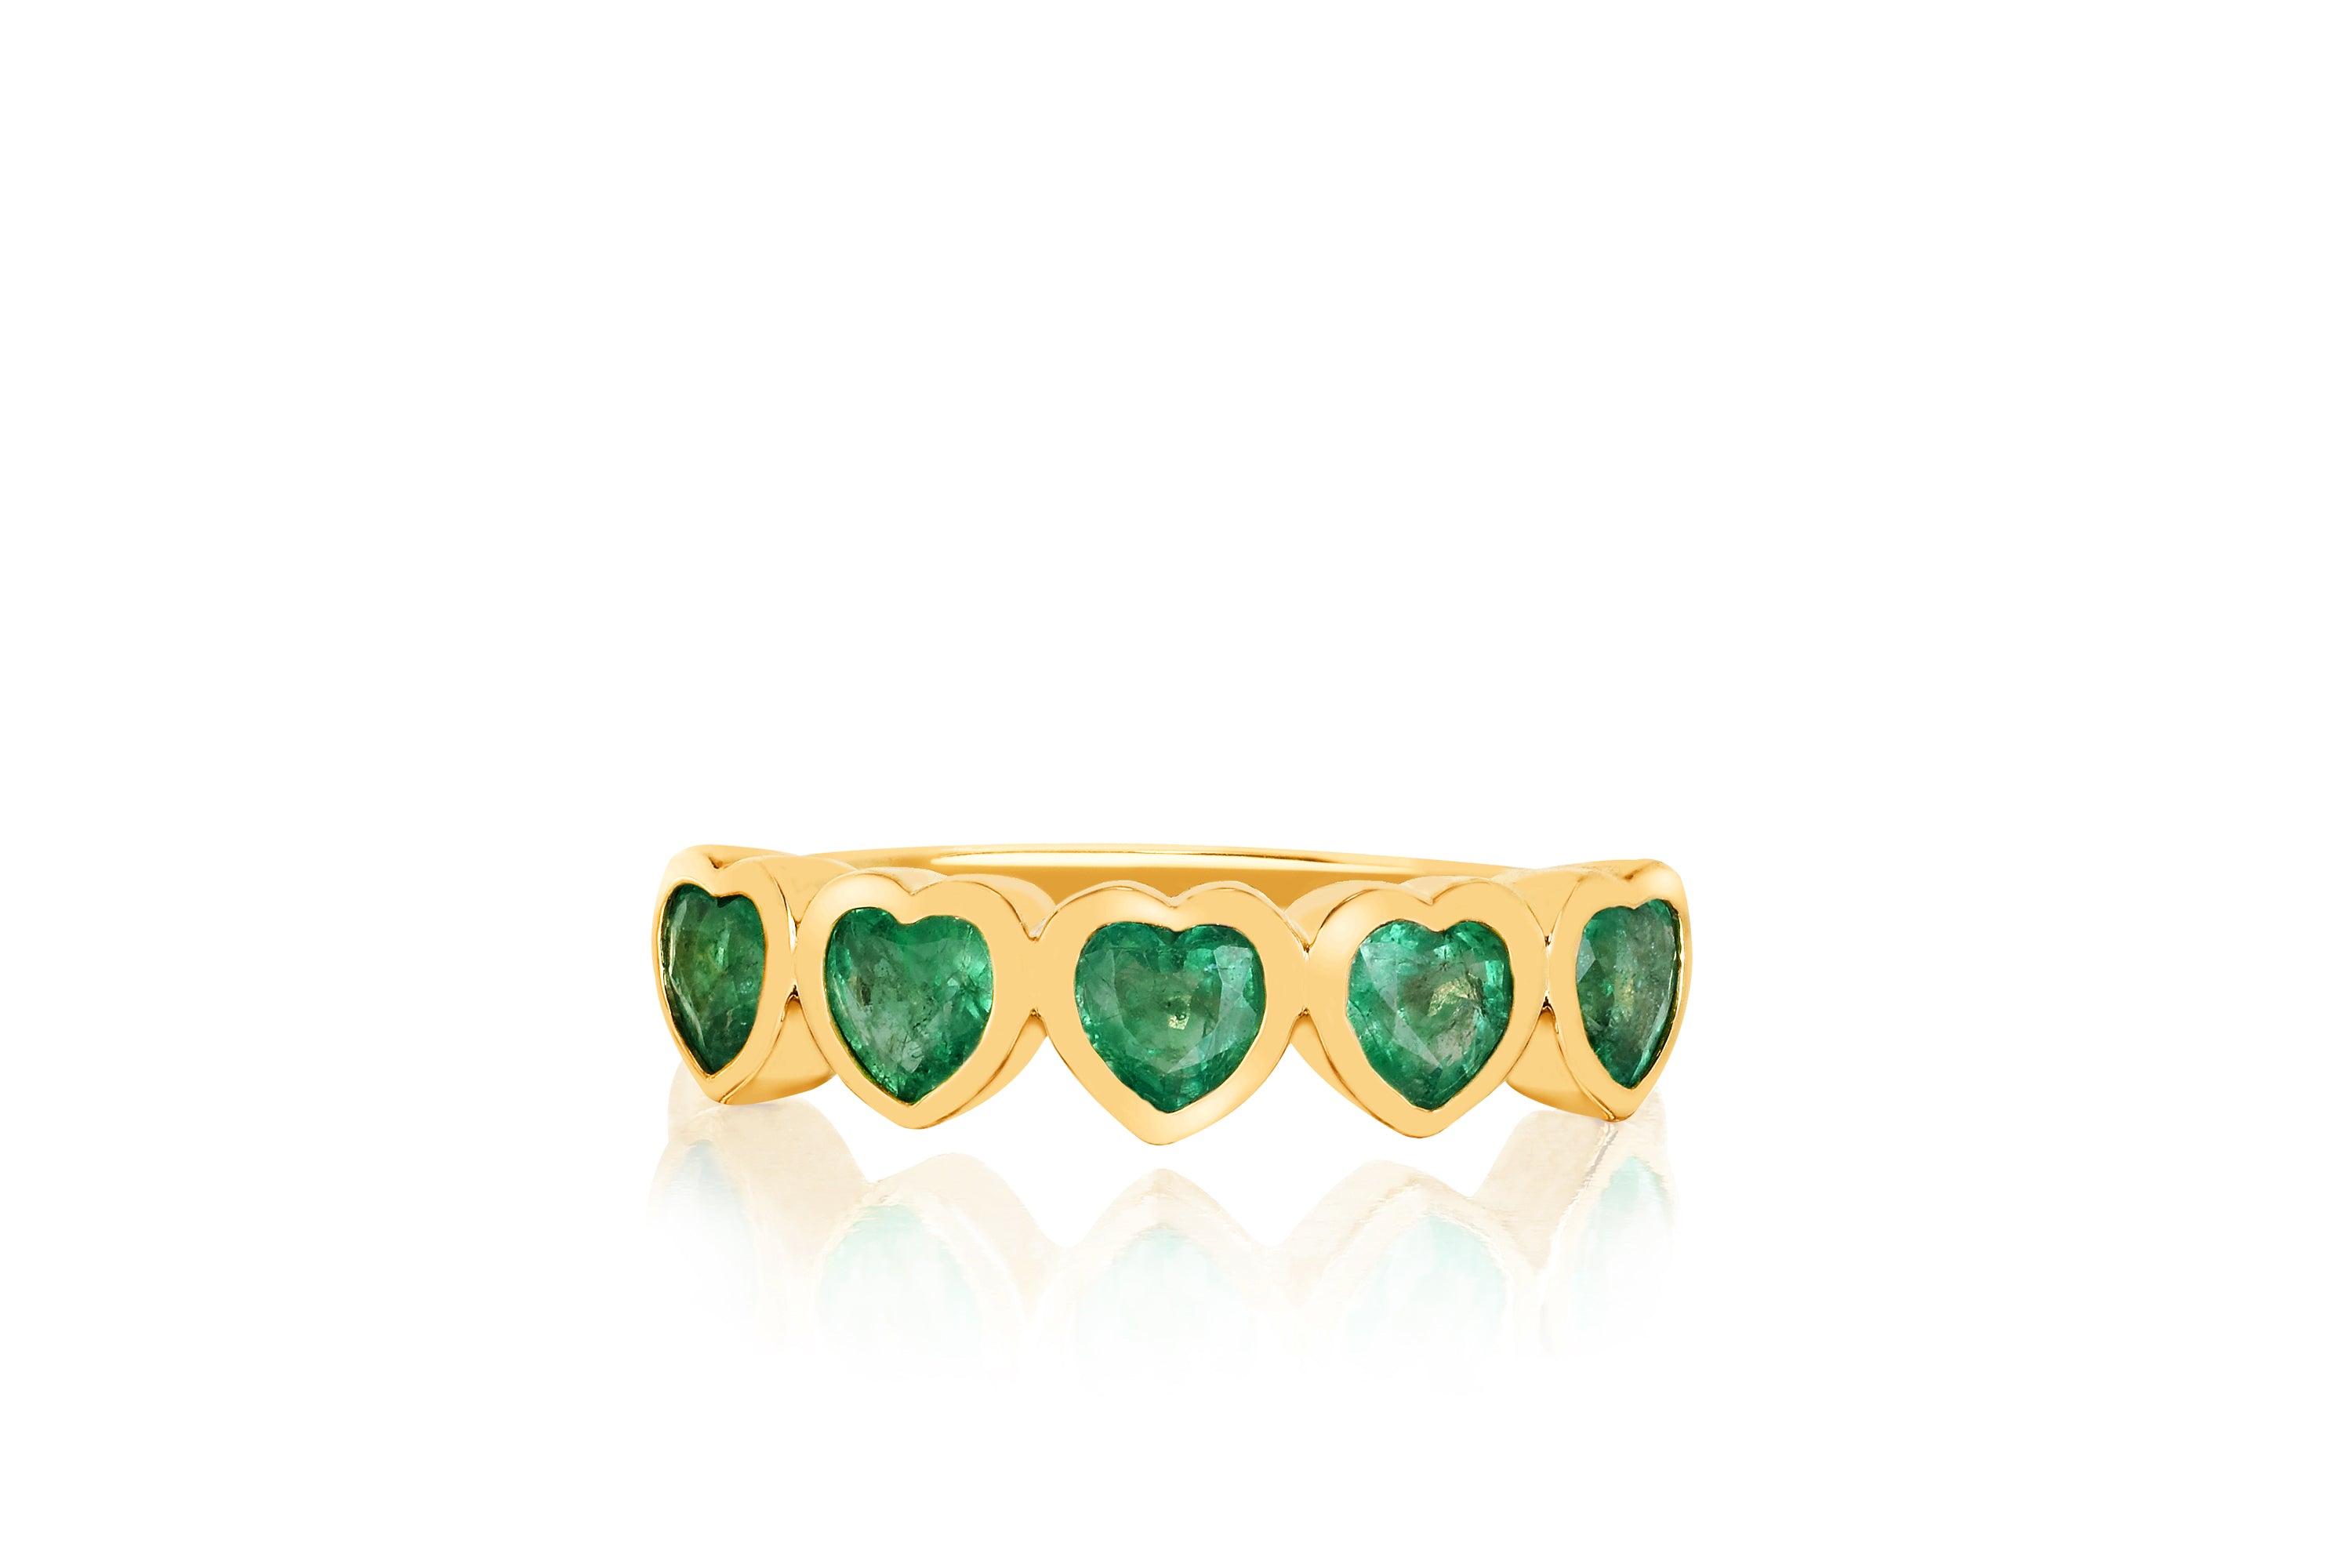 14k (karat) yellow gold multi heart ring with heart-shaped pendants on top with emerald jewel stone centers.